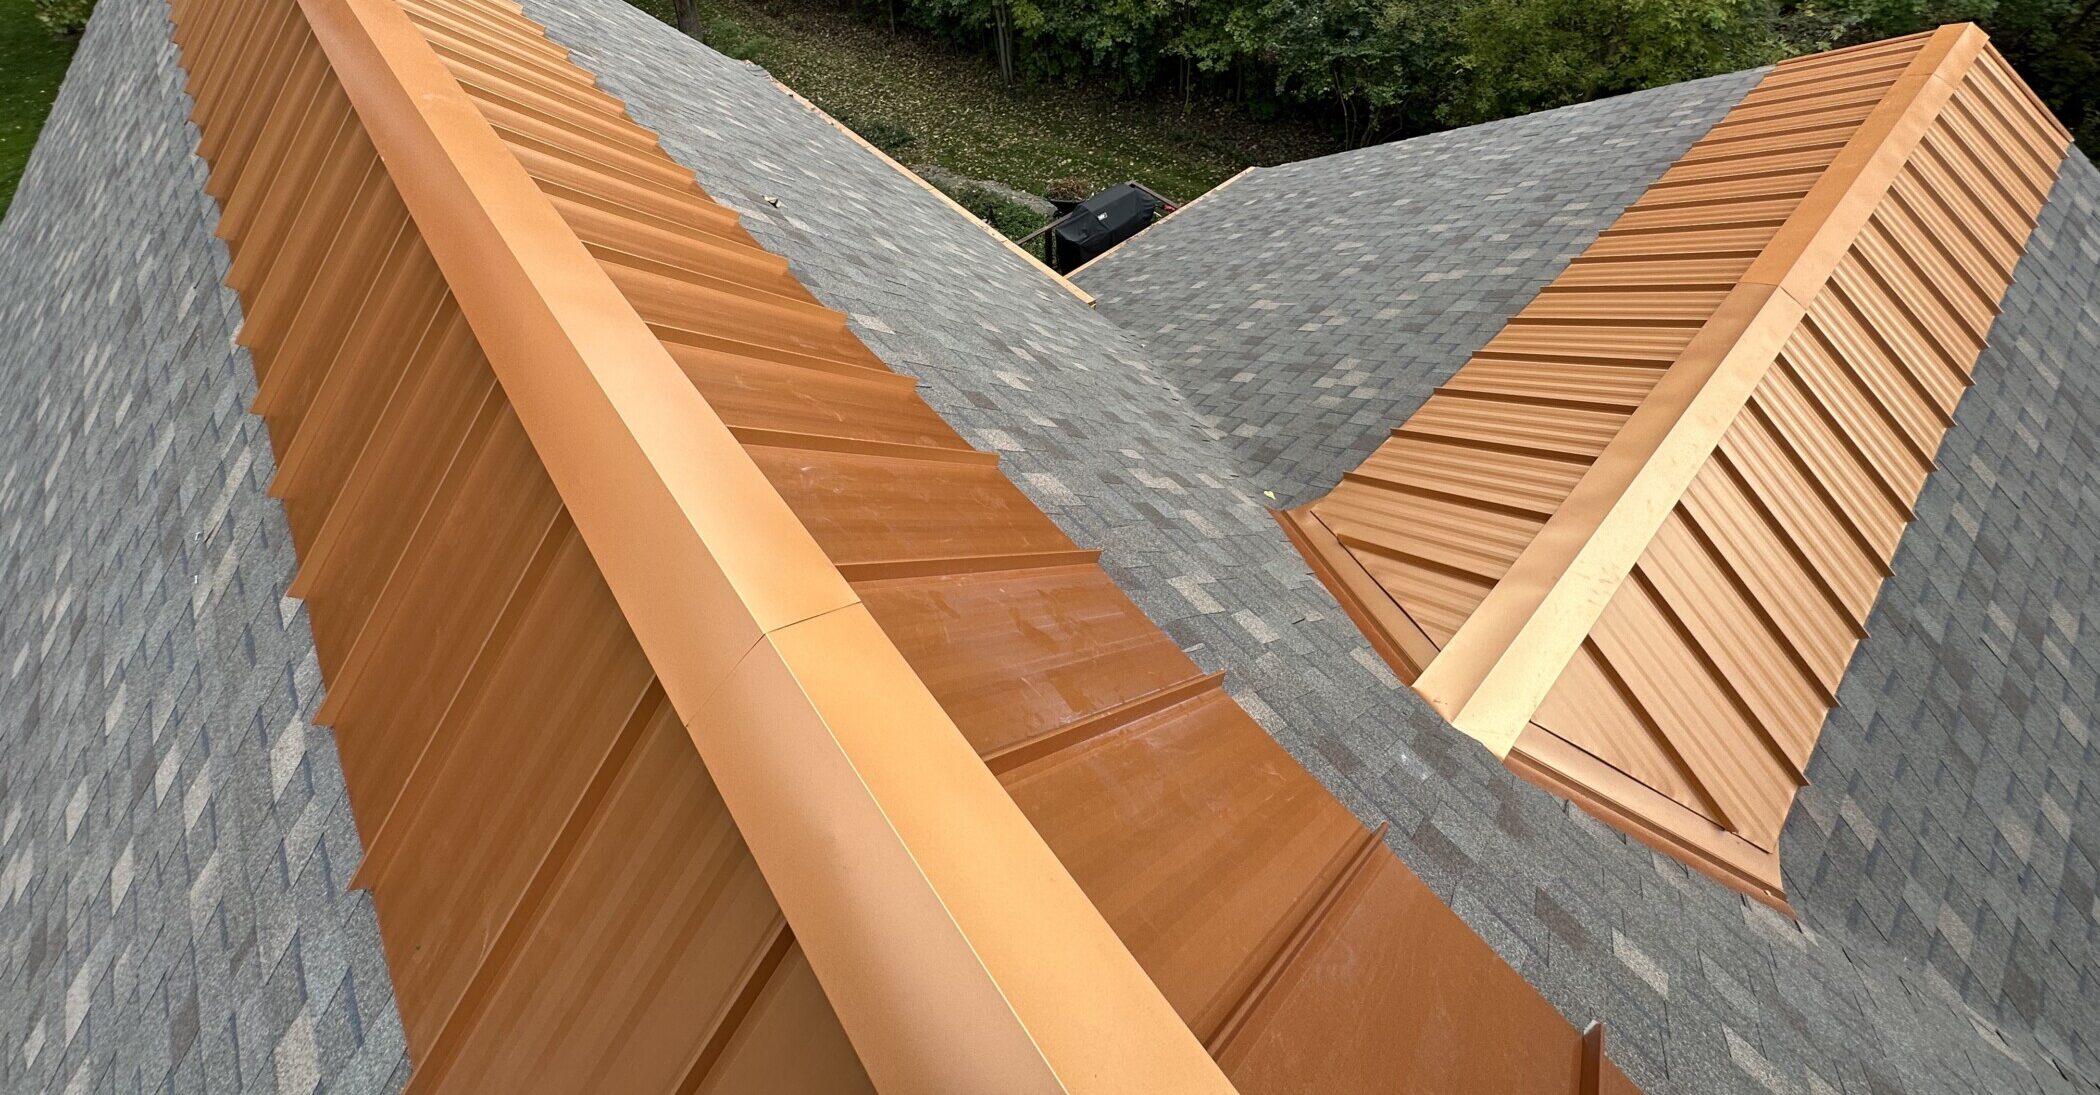 Copper metal ridge cap installed by Shingle and Metal Roofs